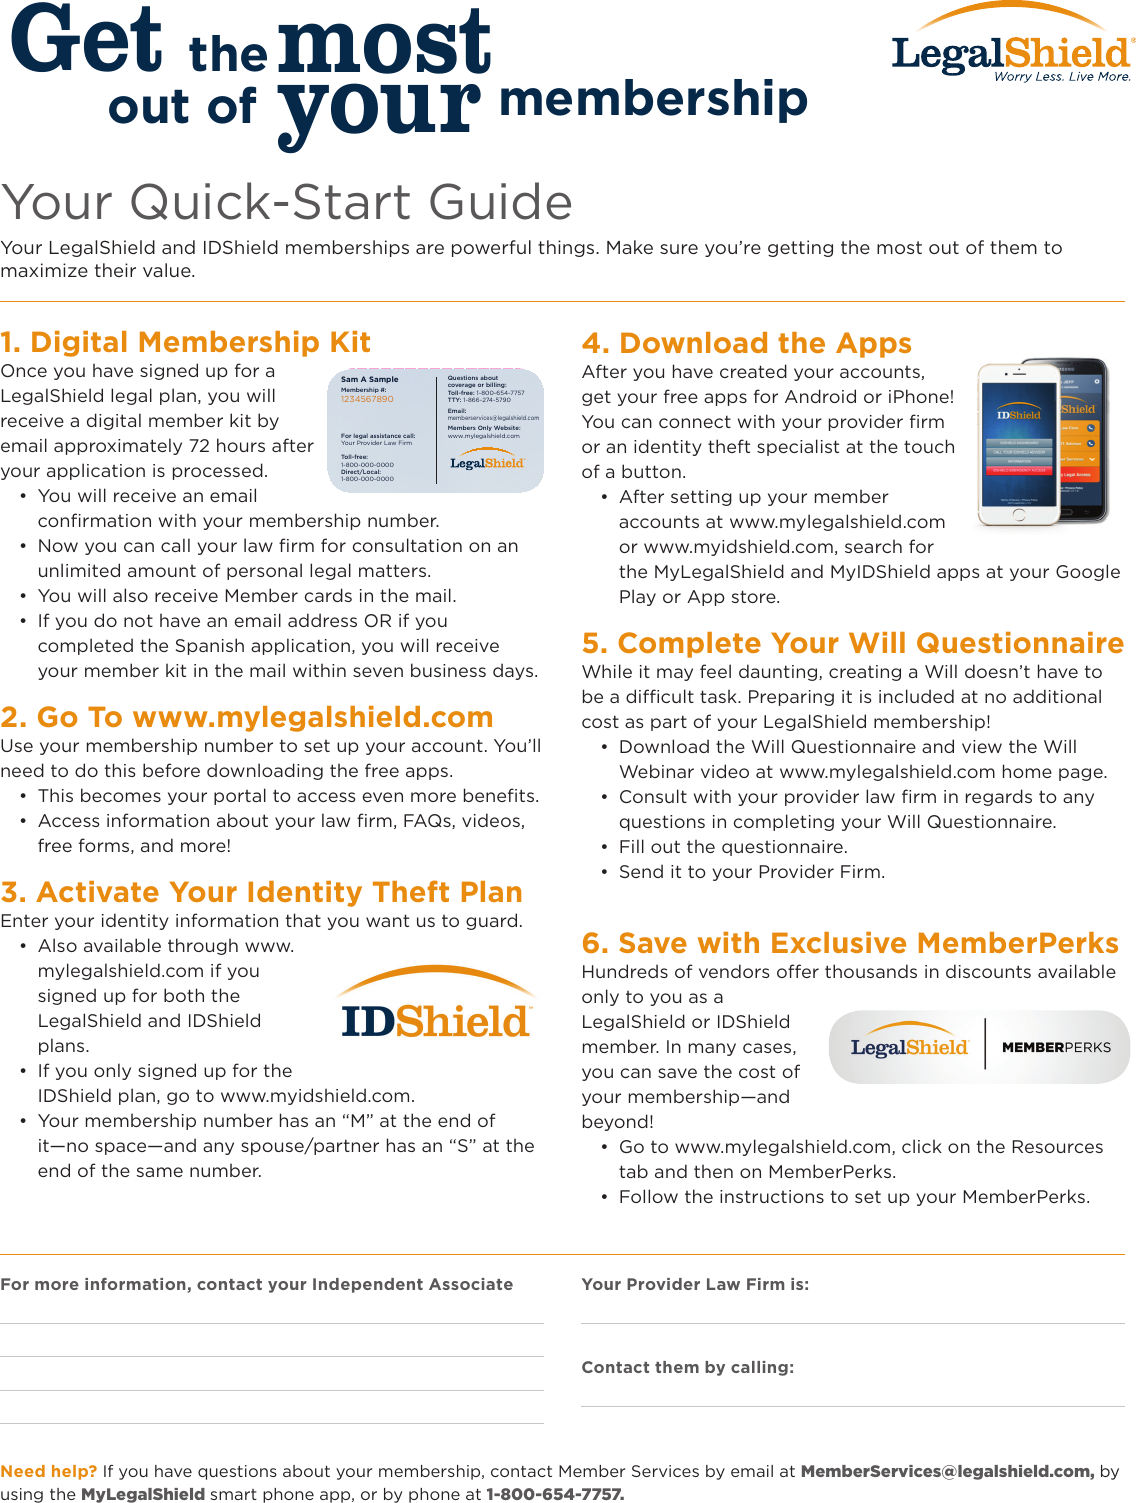 Page 1 of 1 - Legal Shield-Quick-Start-Membership-Guide